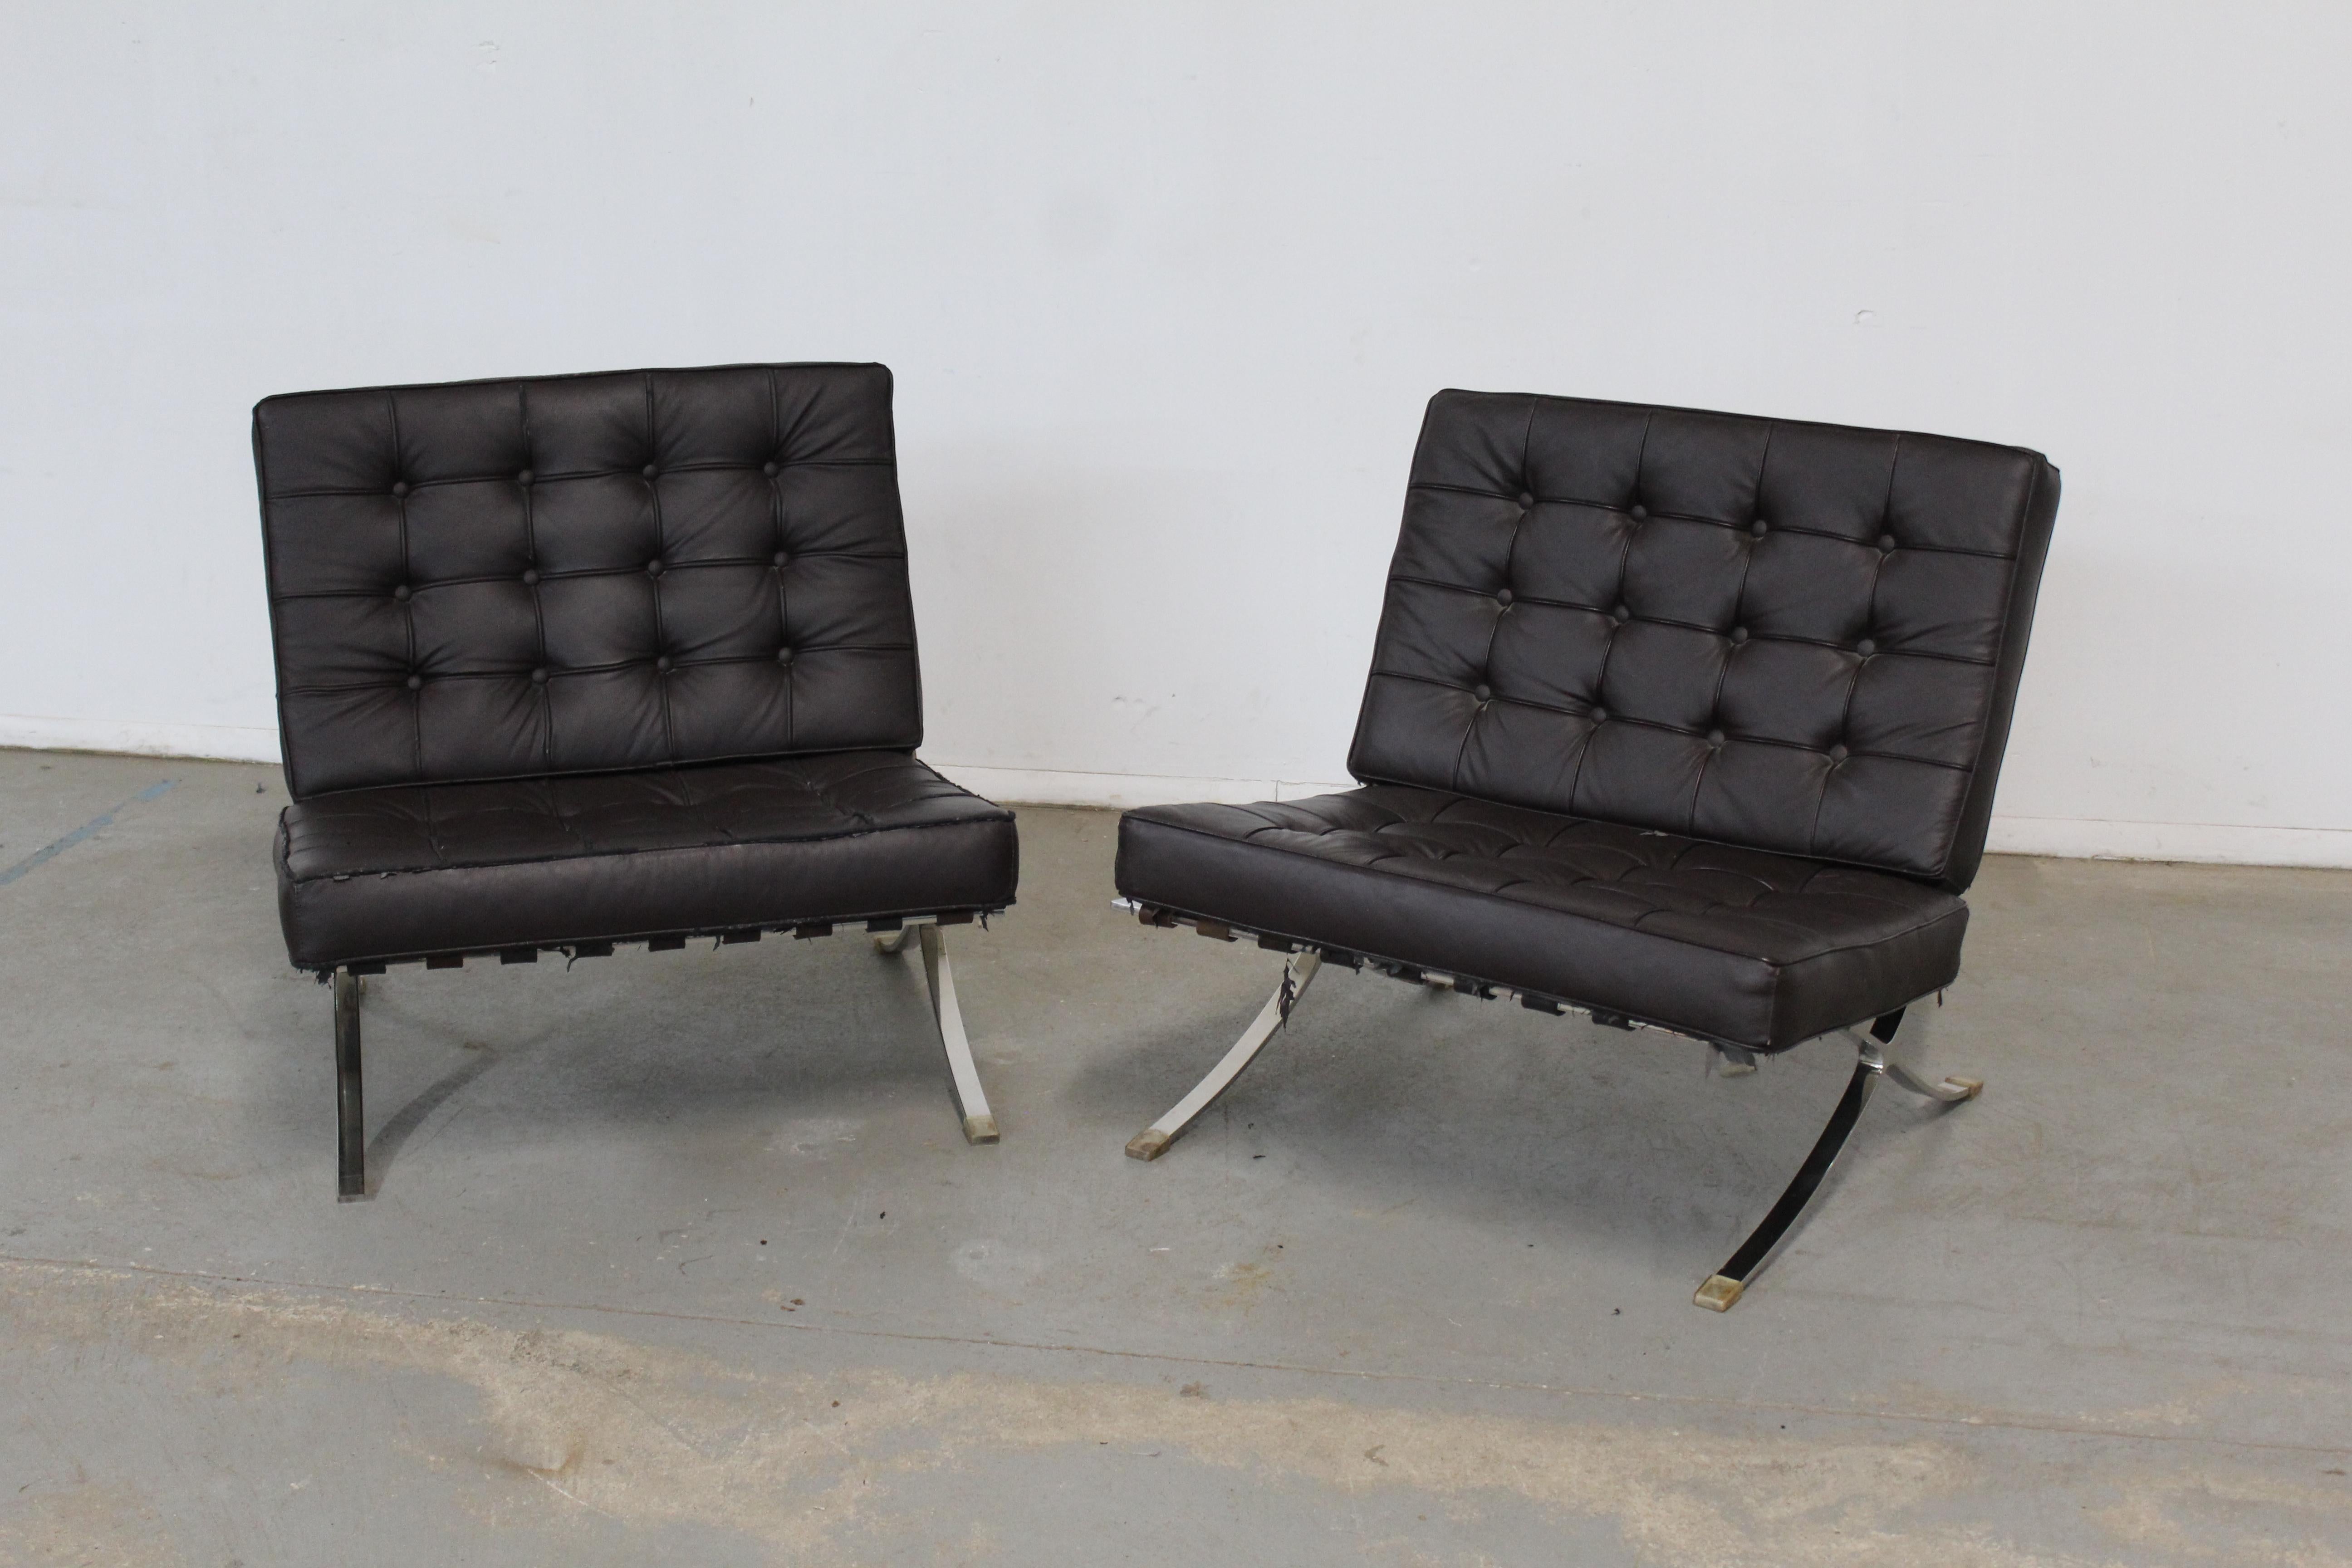 Pair of Vintage Mid-Century Modern Chrome Barcelona Style Lounge Chairs For Sale 11